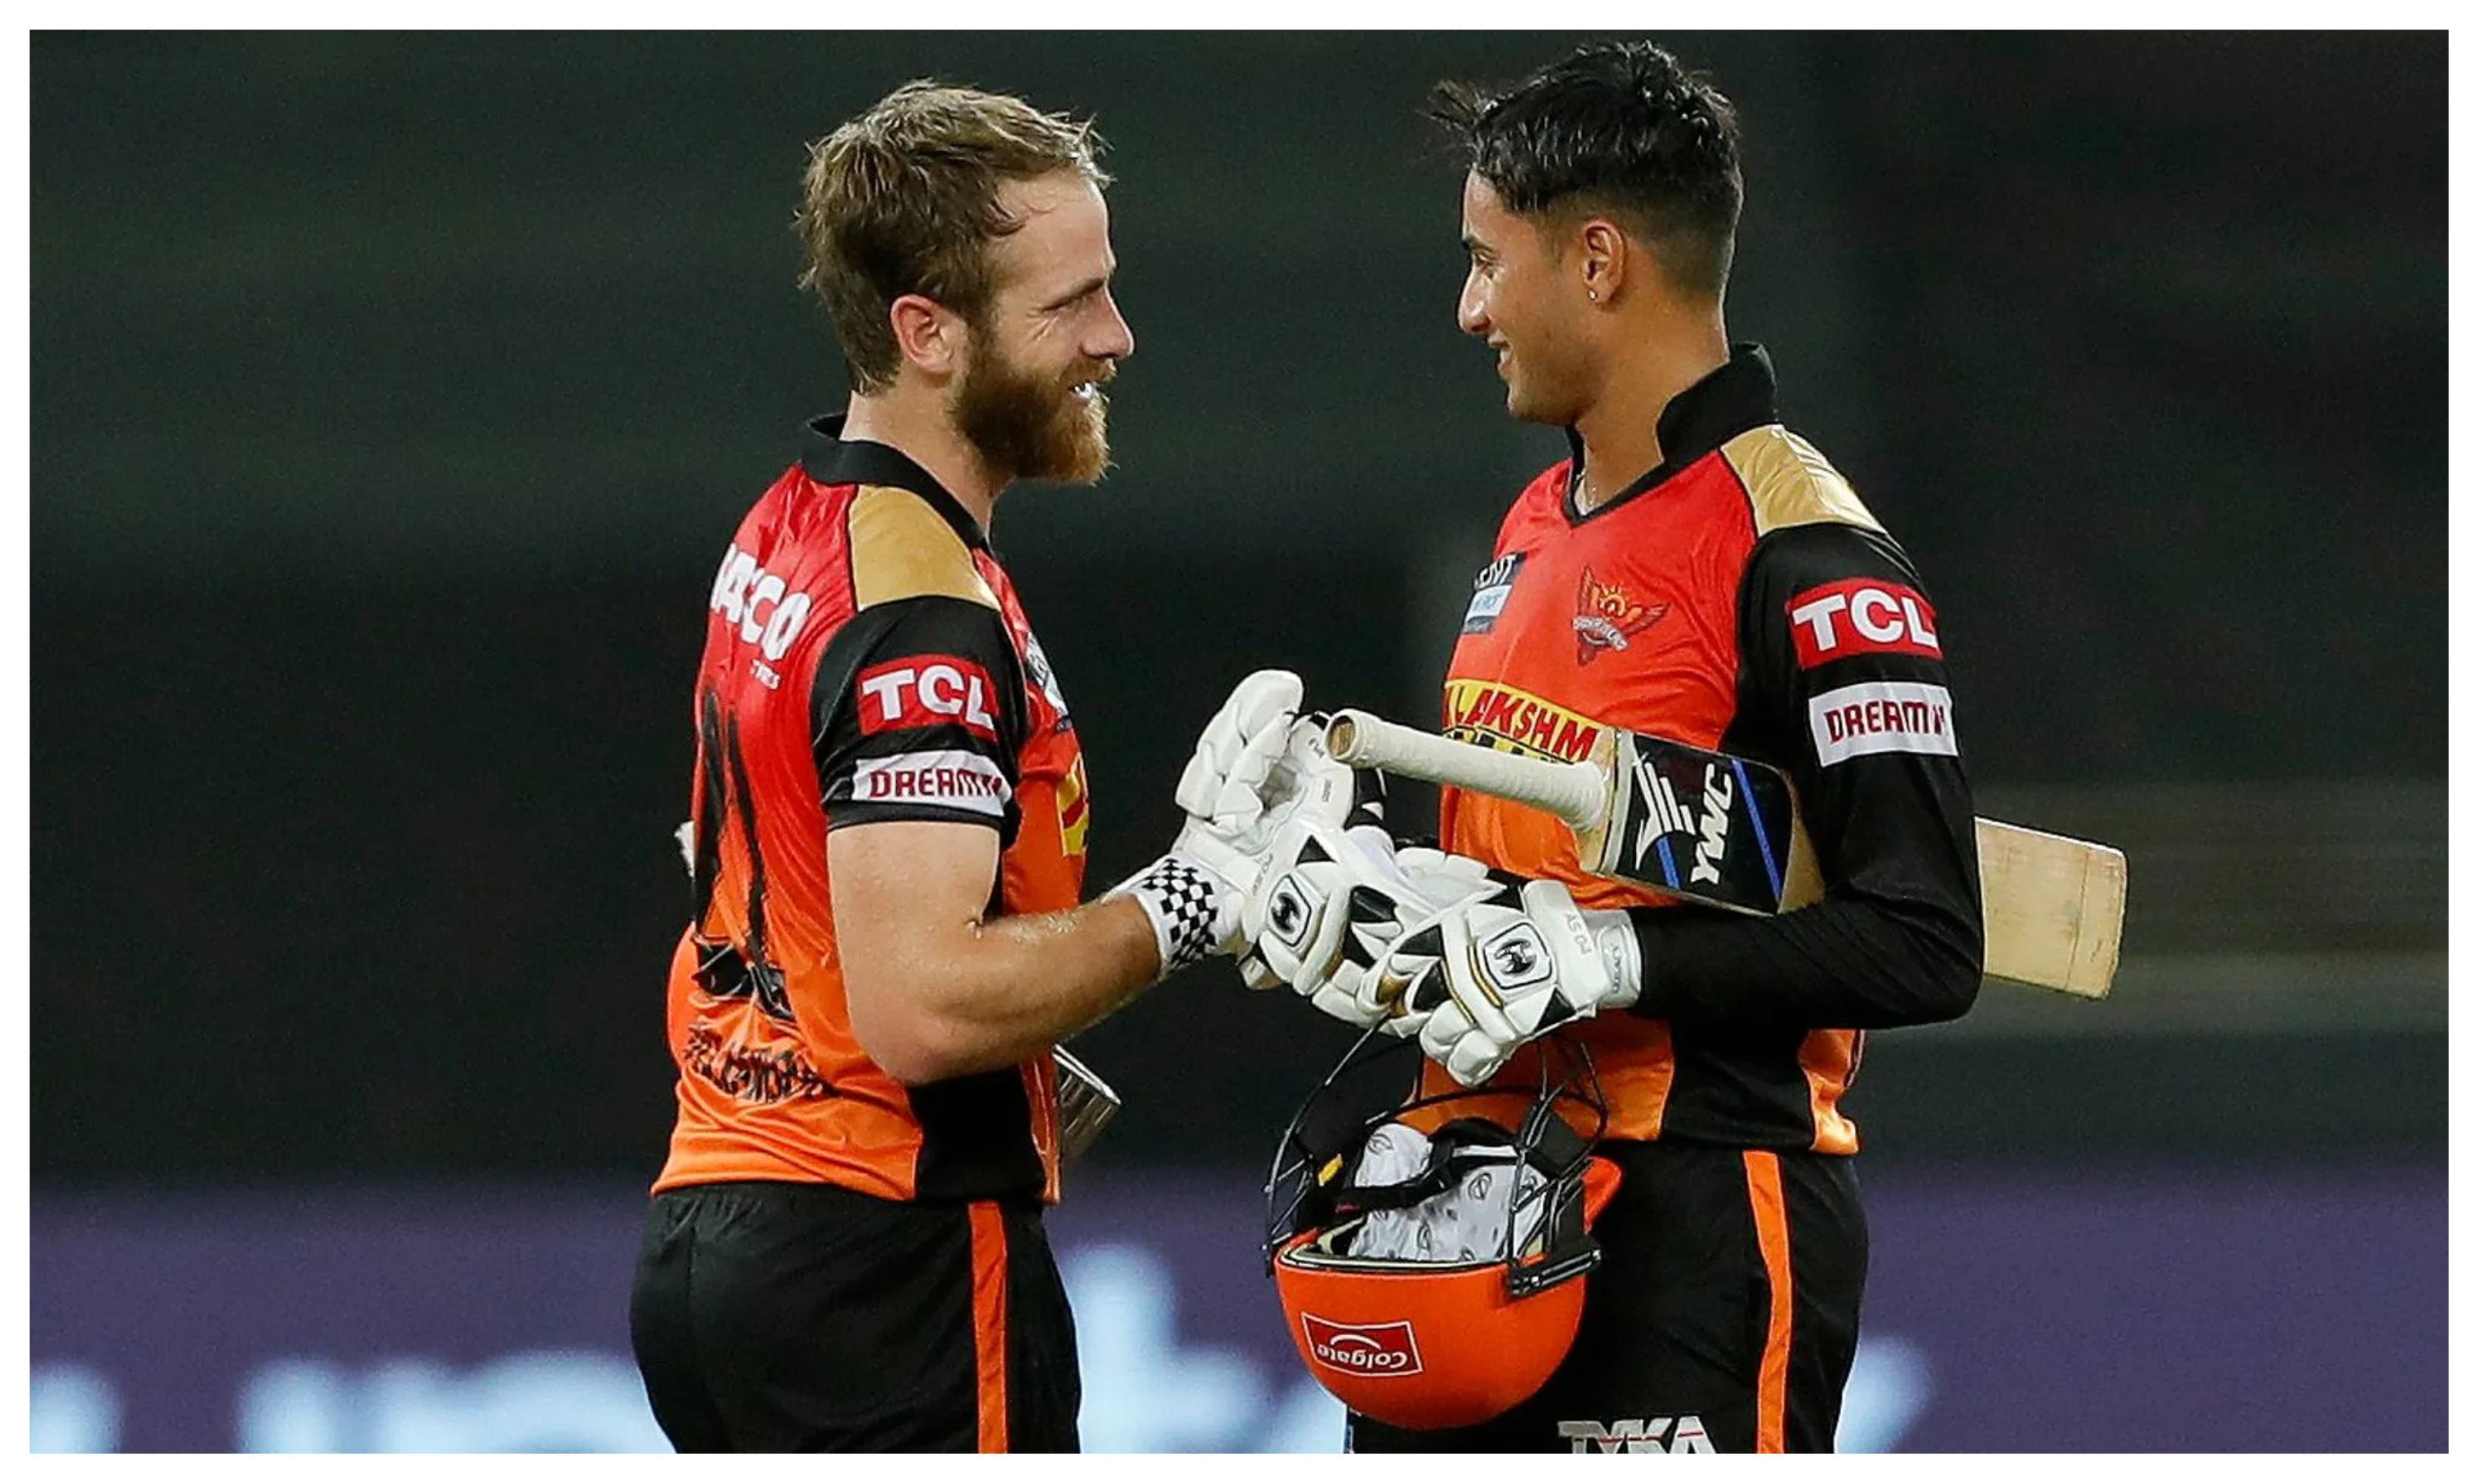 SRH recorded their second win in this year's IPL | BCCI/IPL